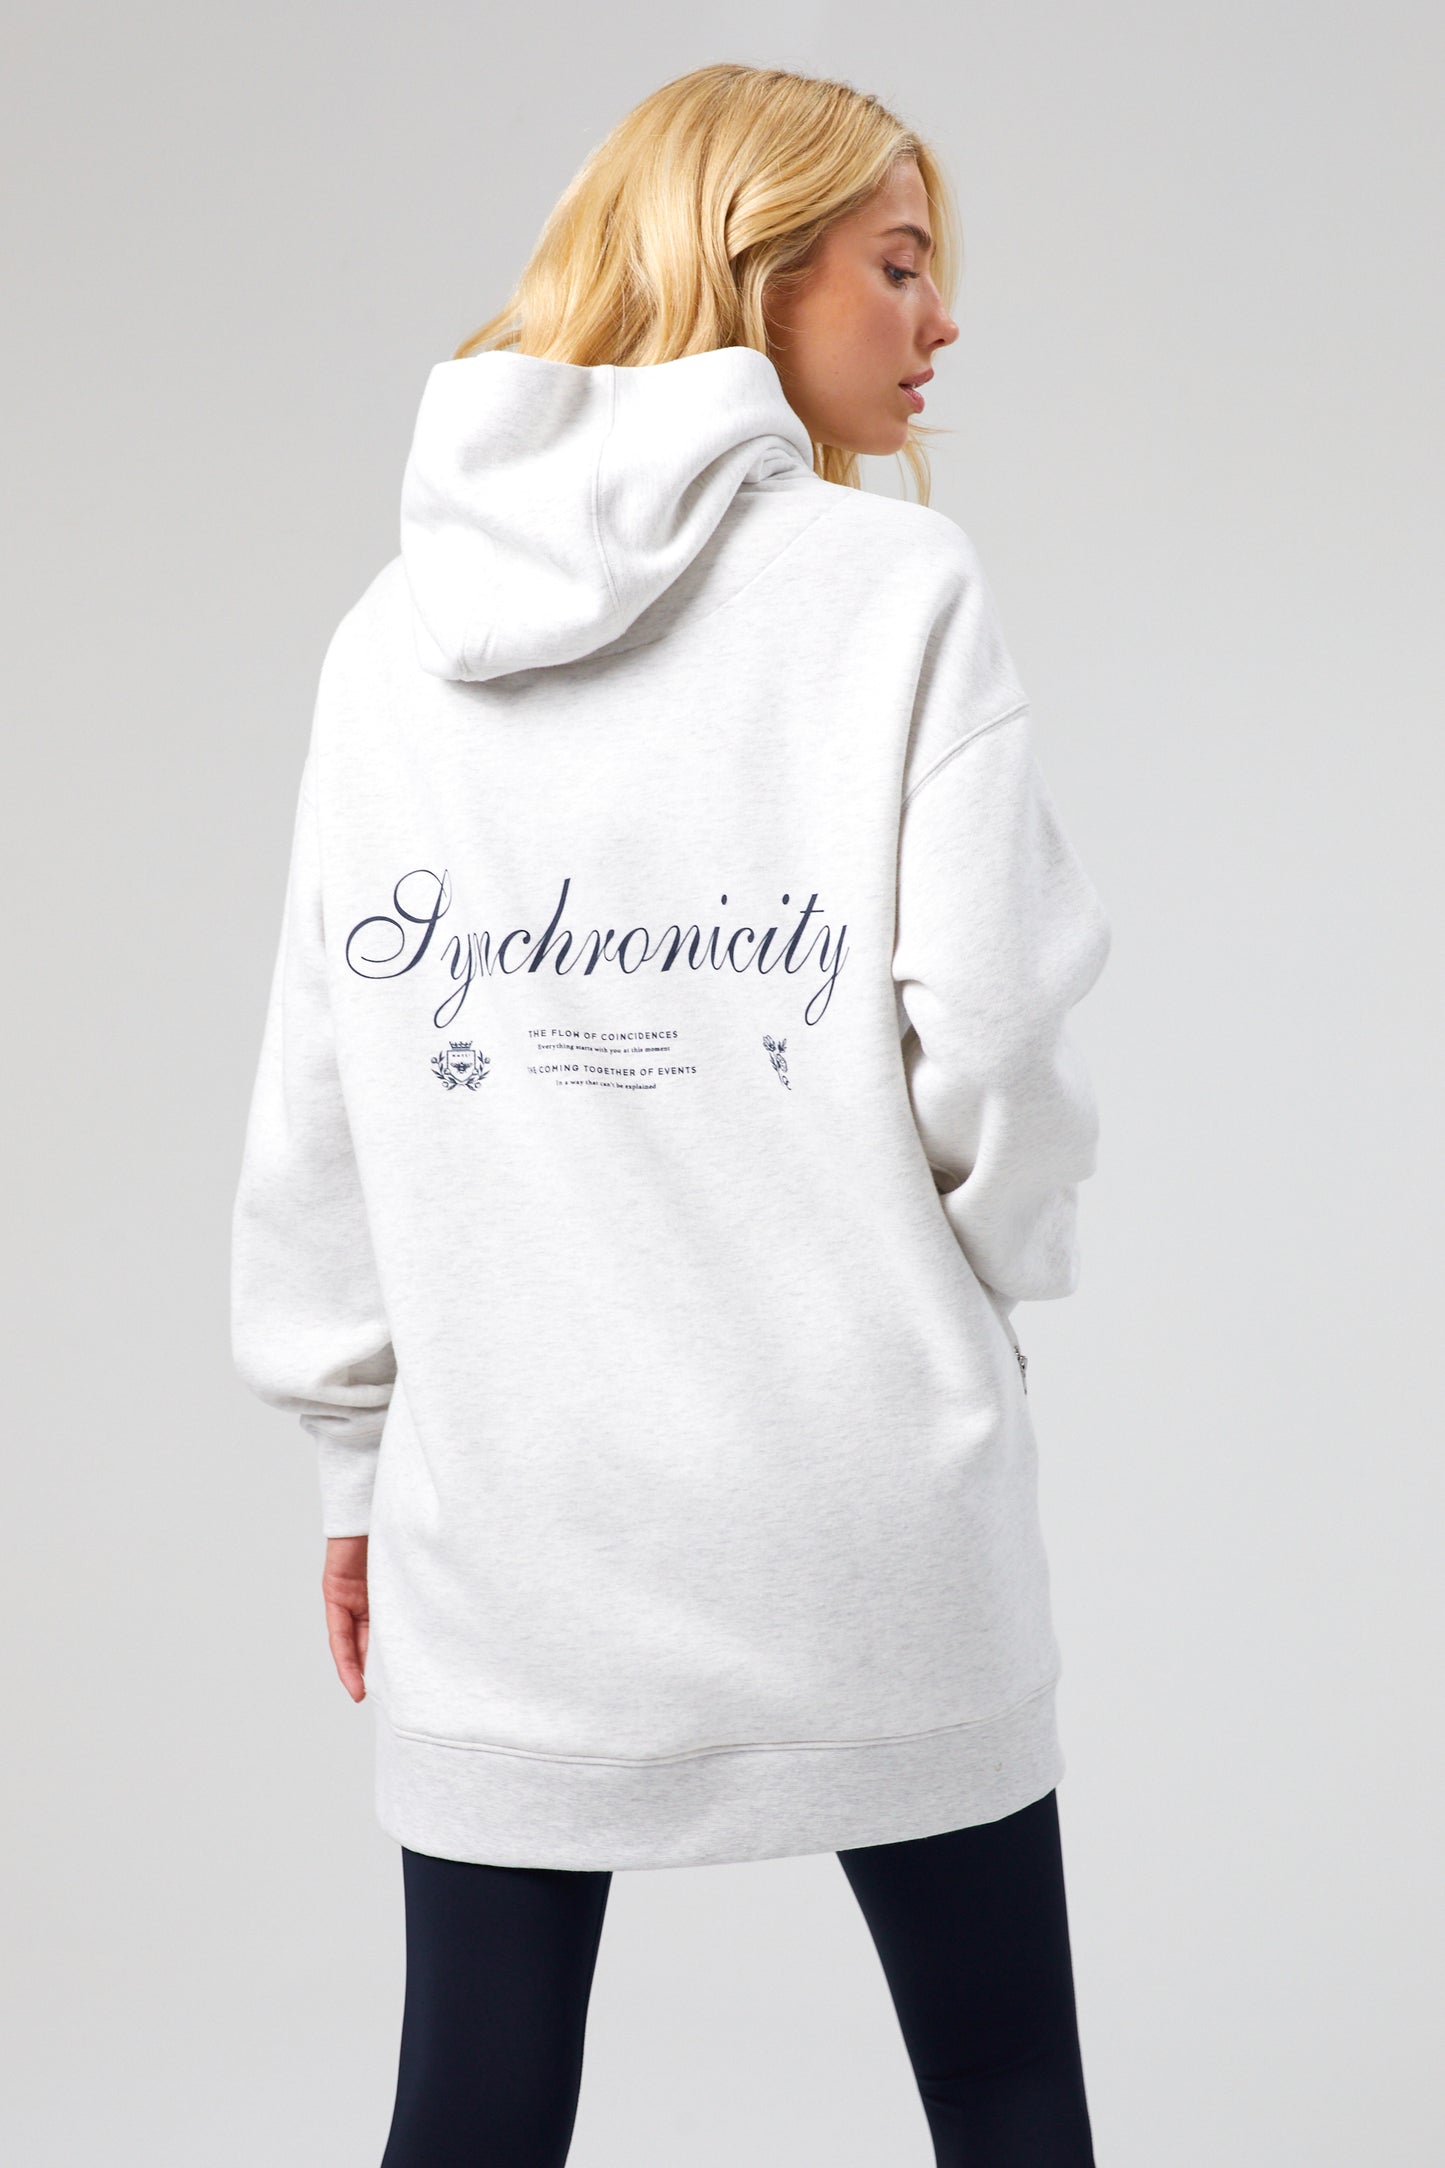 Synchronicity Hoodie - White Marl